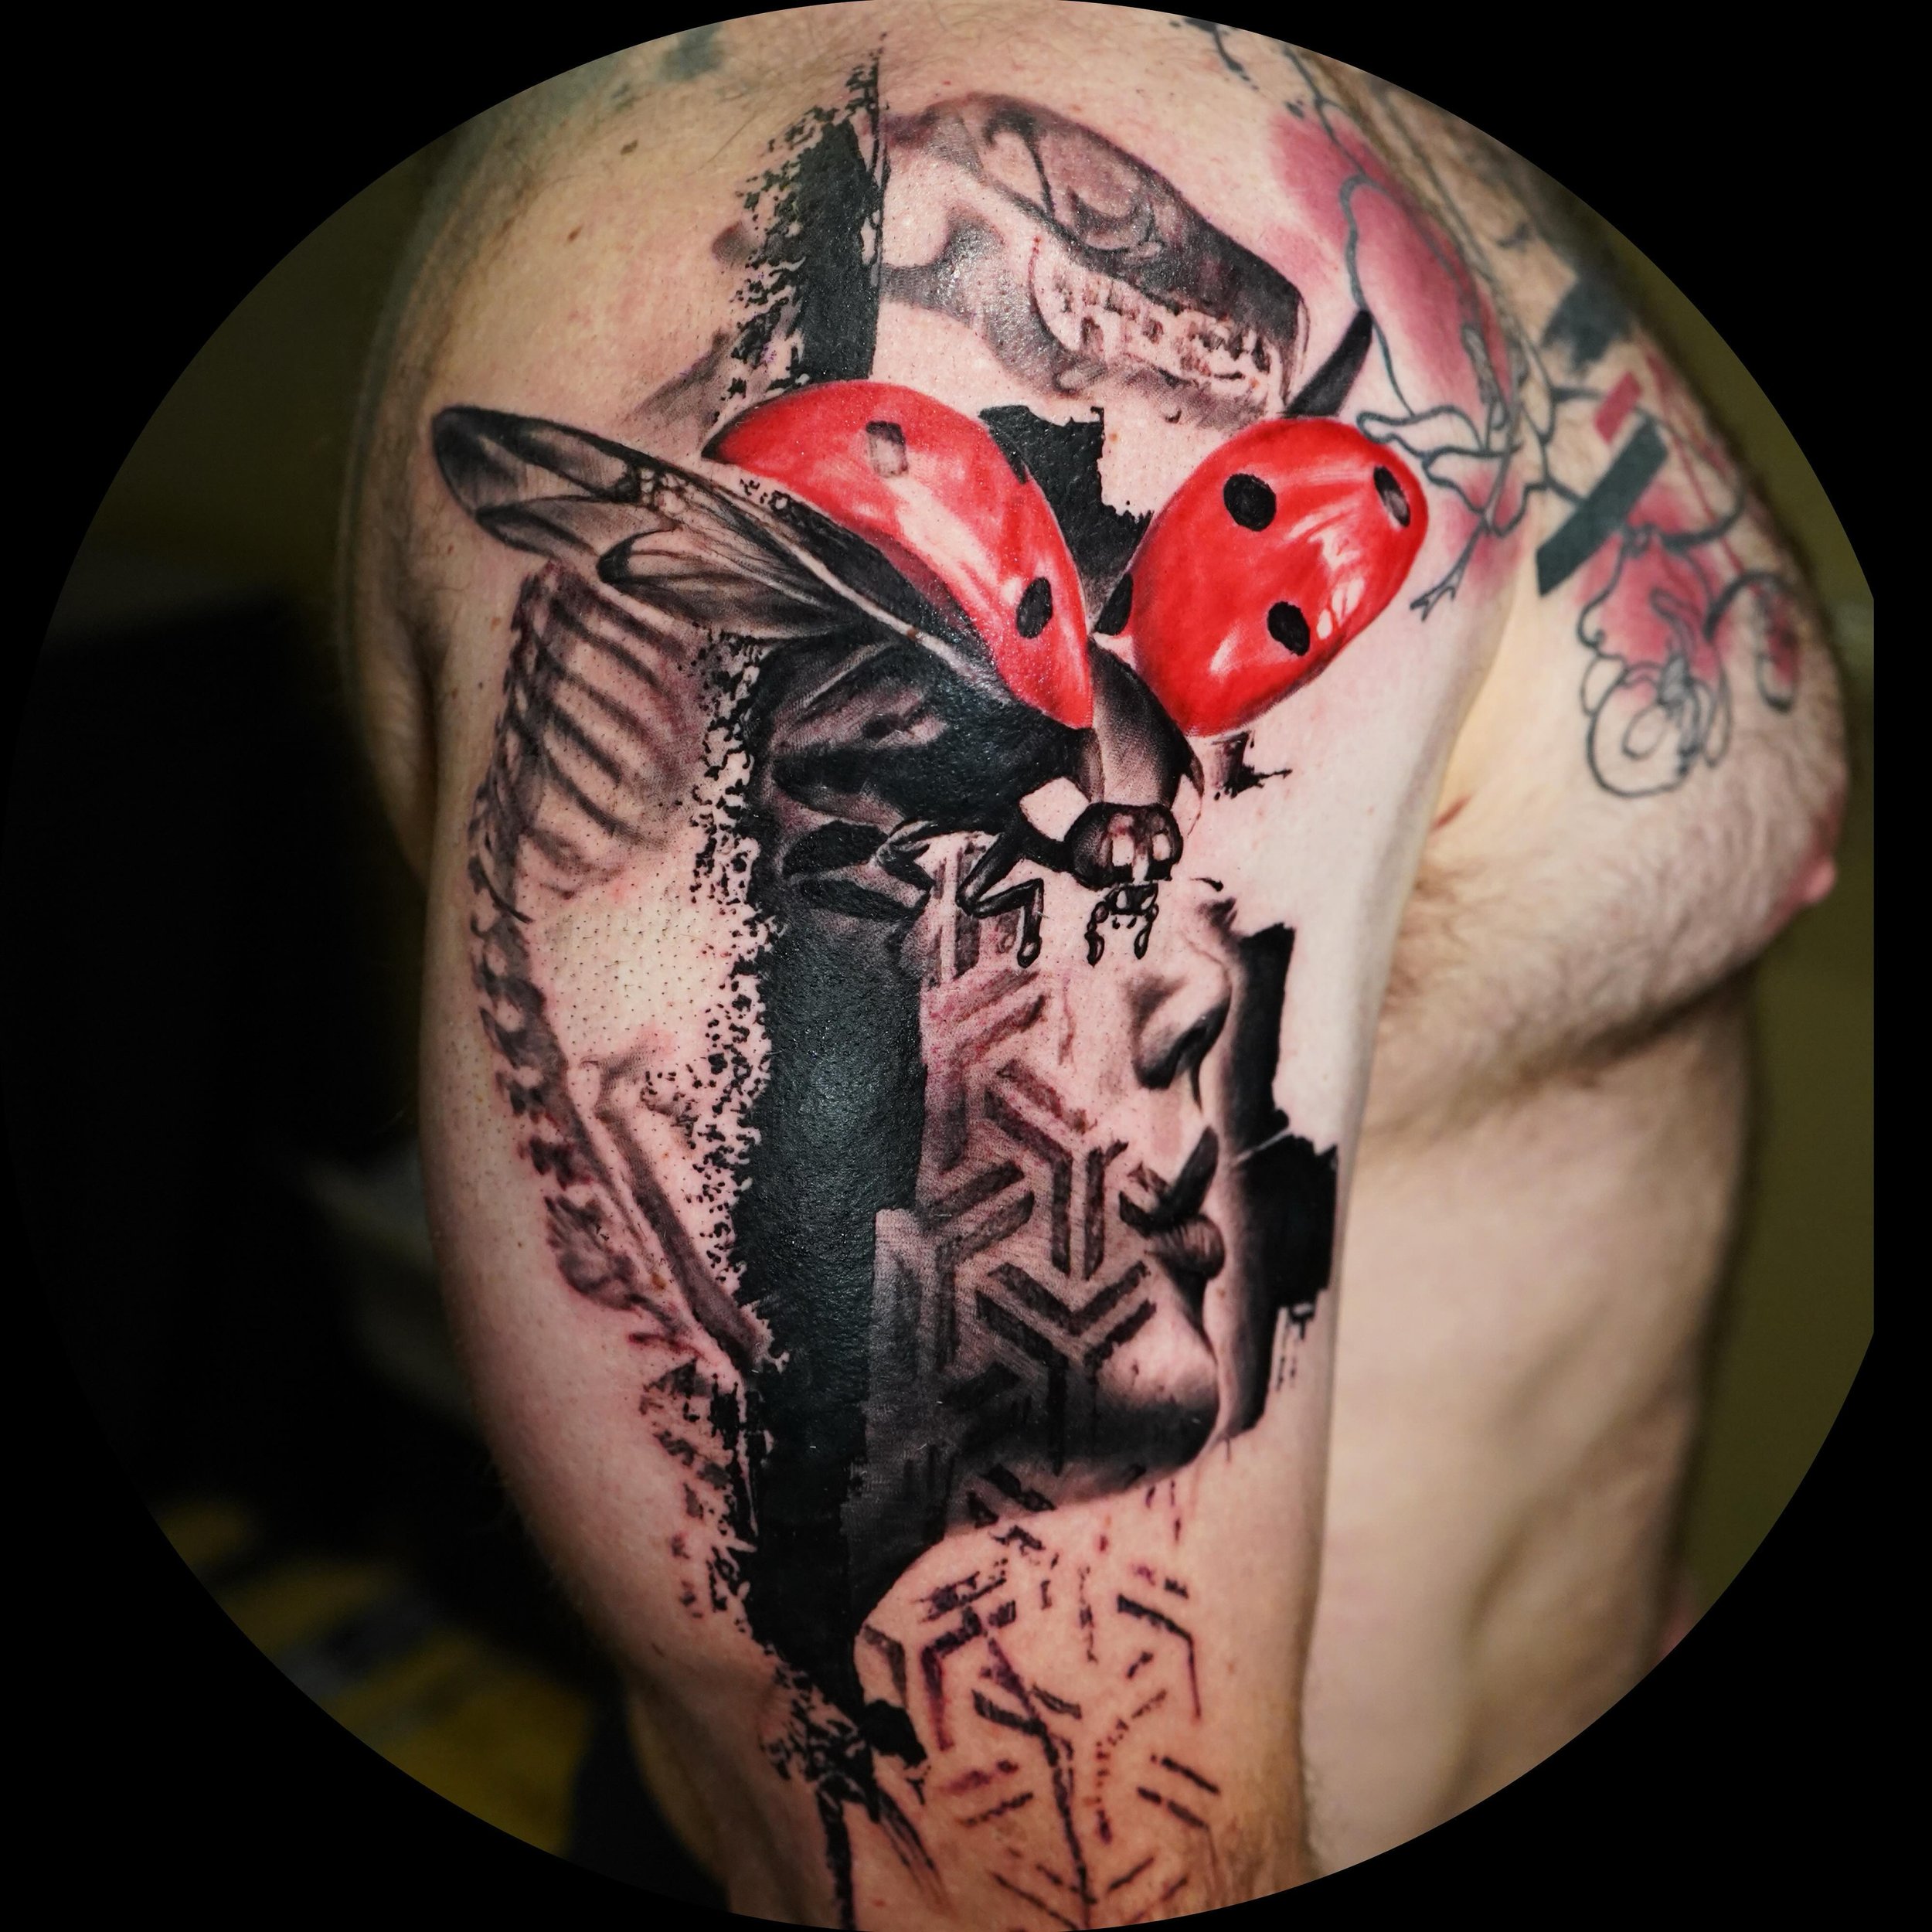 What a great way to spend a #Sunday in #LakeTahoe. Made the #trashpolka #style #ladybug for Sabia s daughter. Thx guys? Great meeting you #artesobscurae #realgone #realgonedenver #customtattoo #largescale #trashpolka #largescaletattoo #denvertattooar